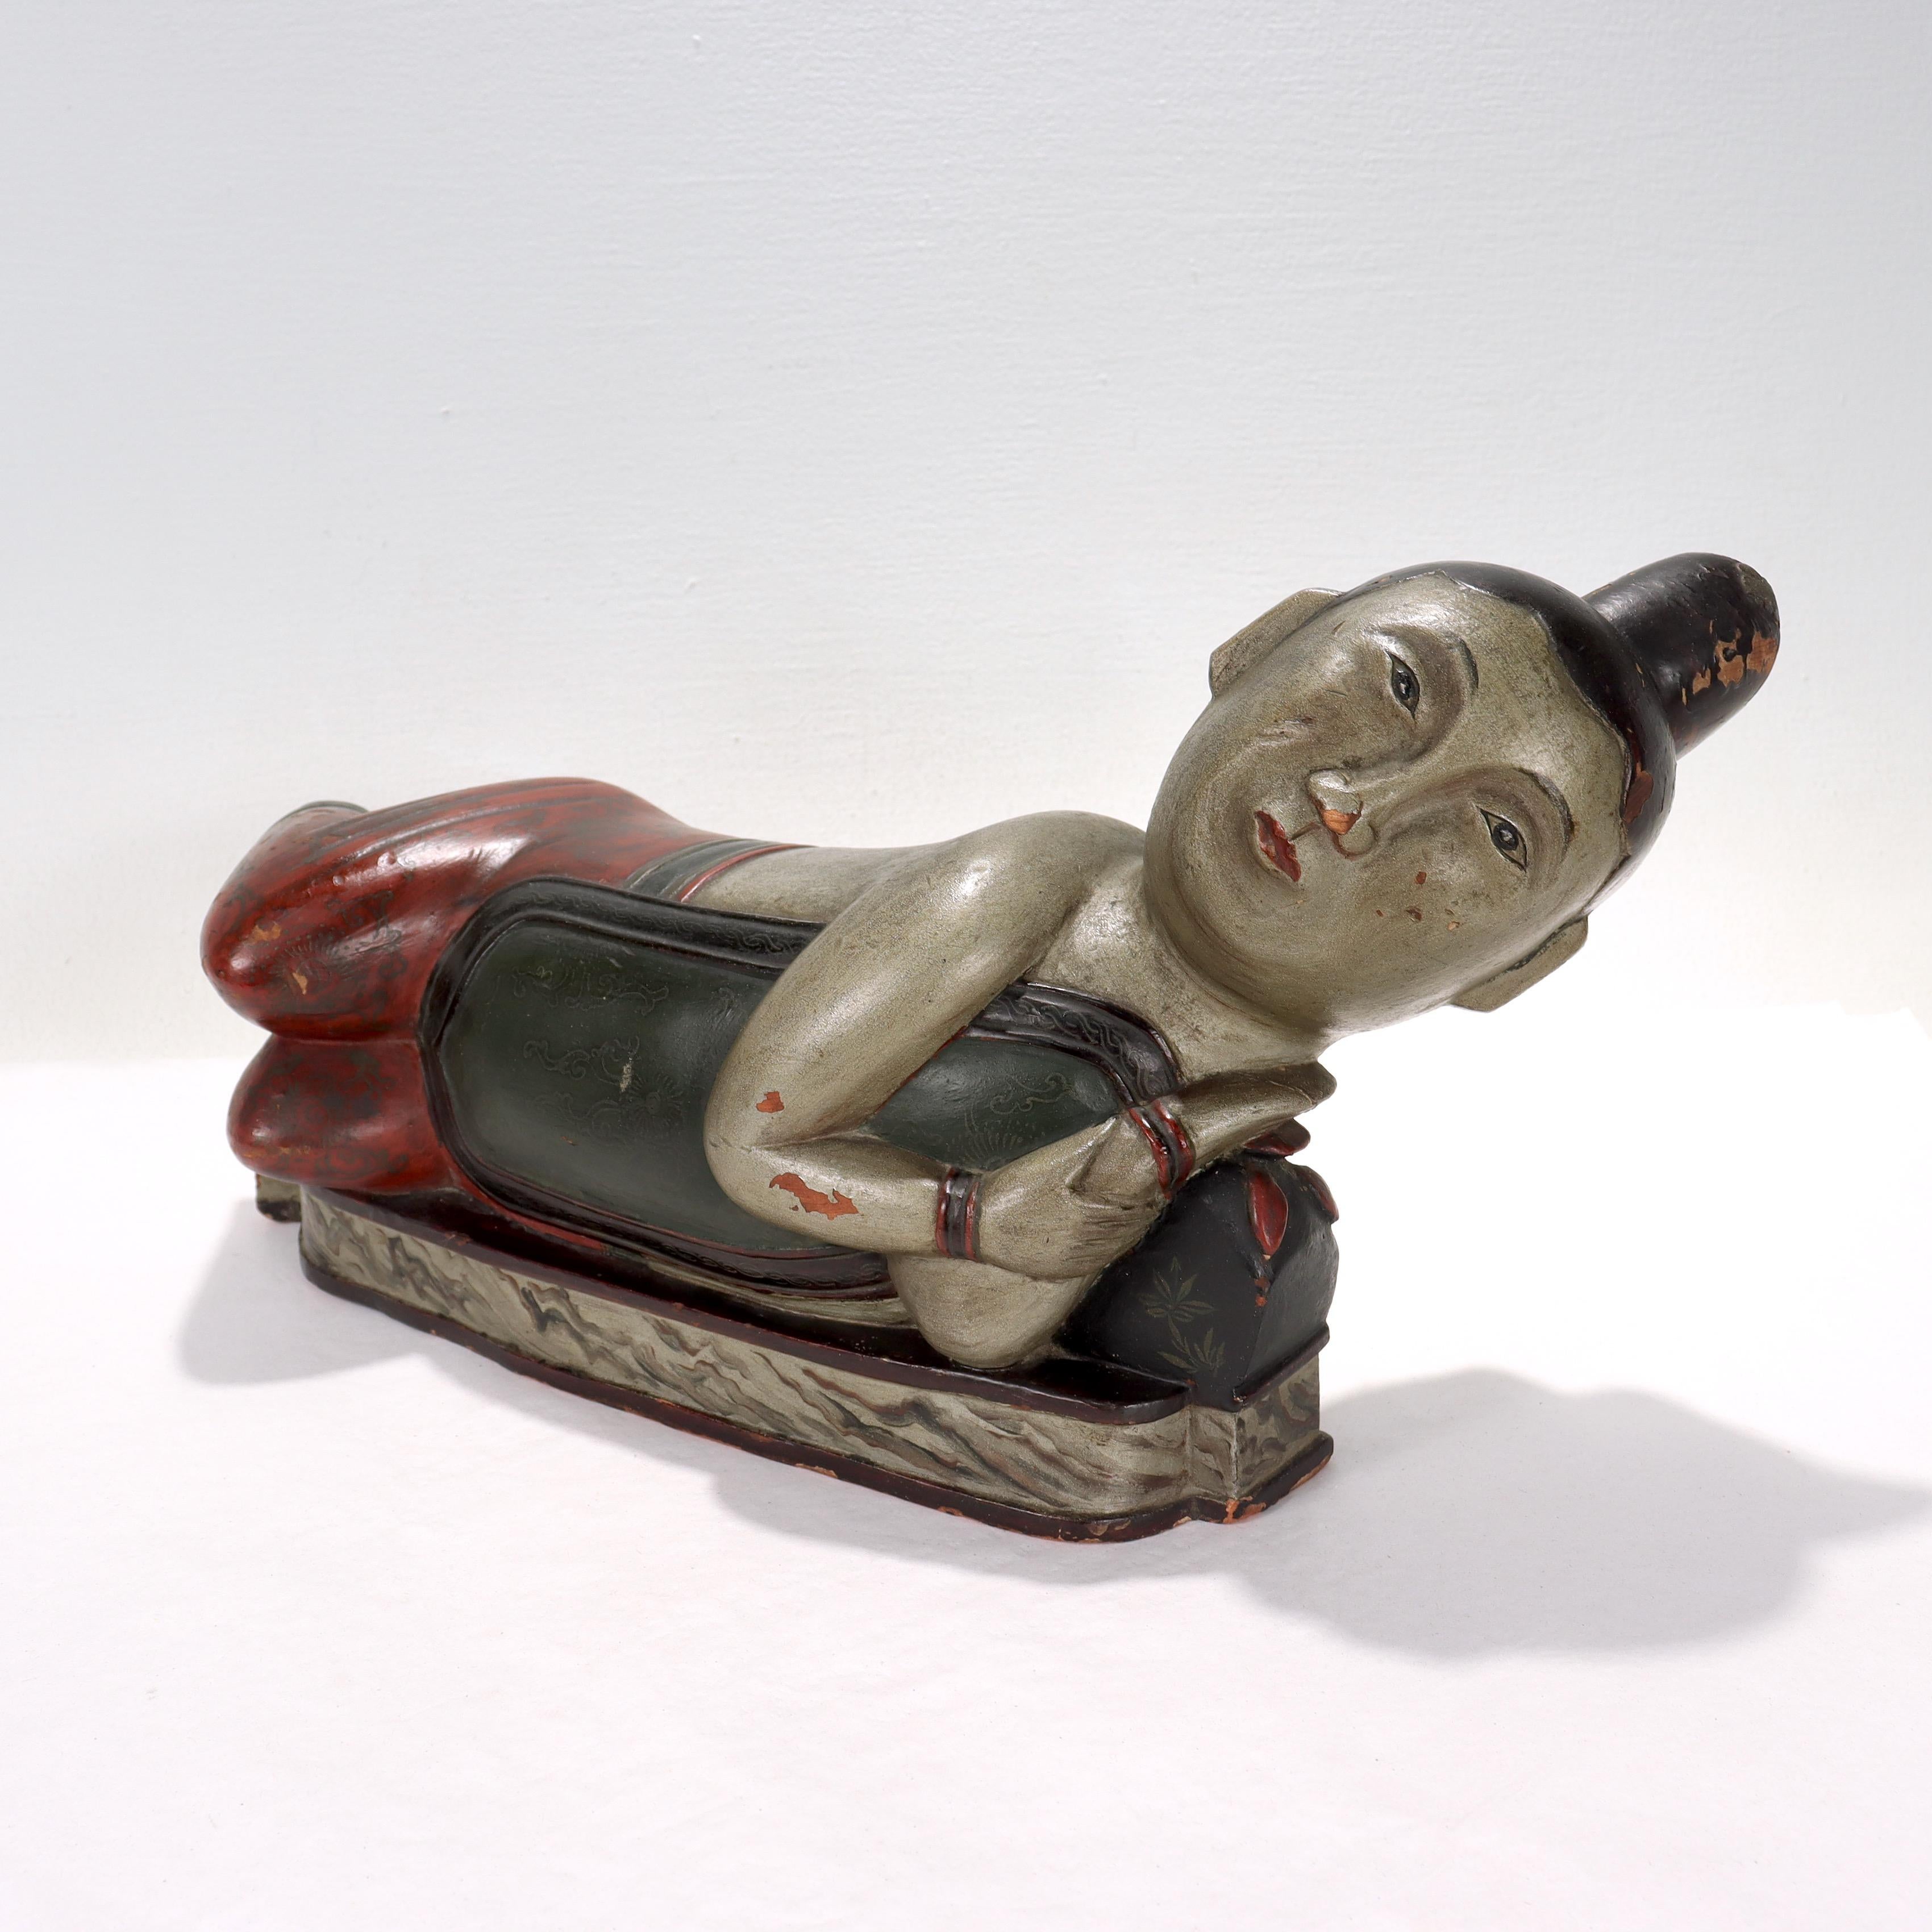 A fine antique Chinese wooden head rest.

Carved in the form of a recumbent or resting man.

Decorated in polychrome decoration. The body painted in a silver tone with his hair and eyes in black with red undertones. There is further scroll work